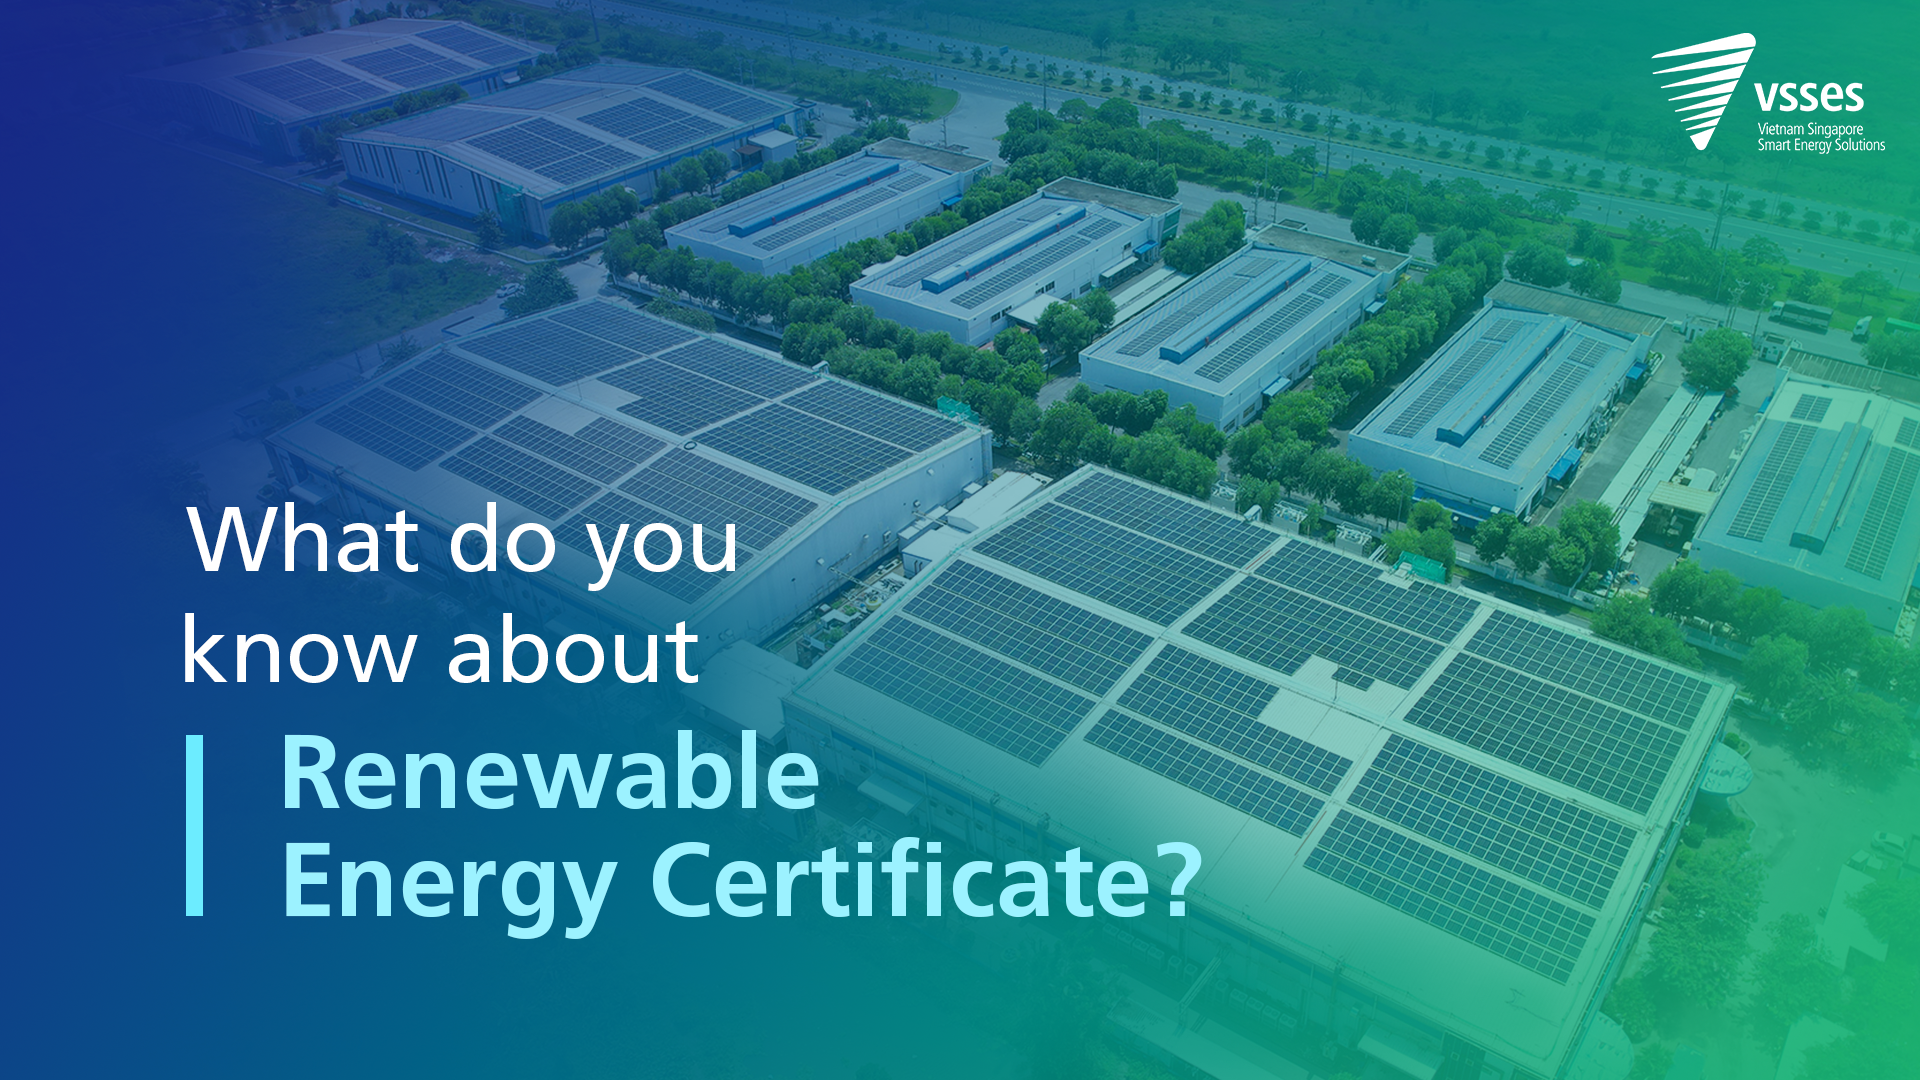 What do you know about the Renewable Energy Certificate?